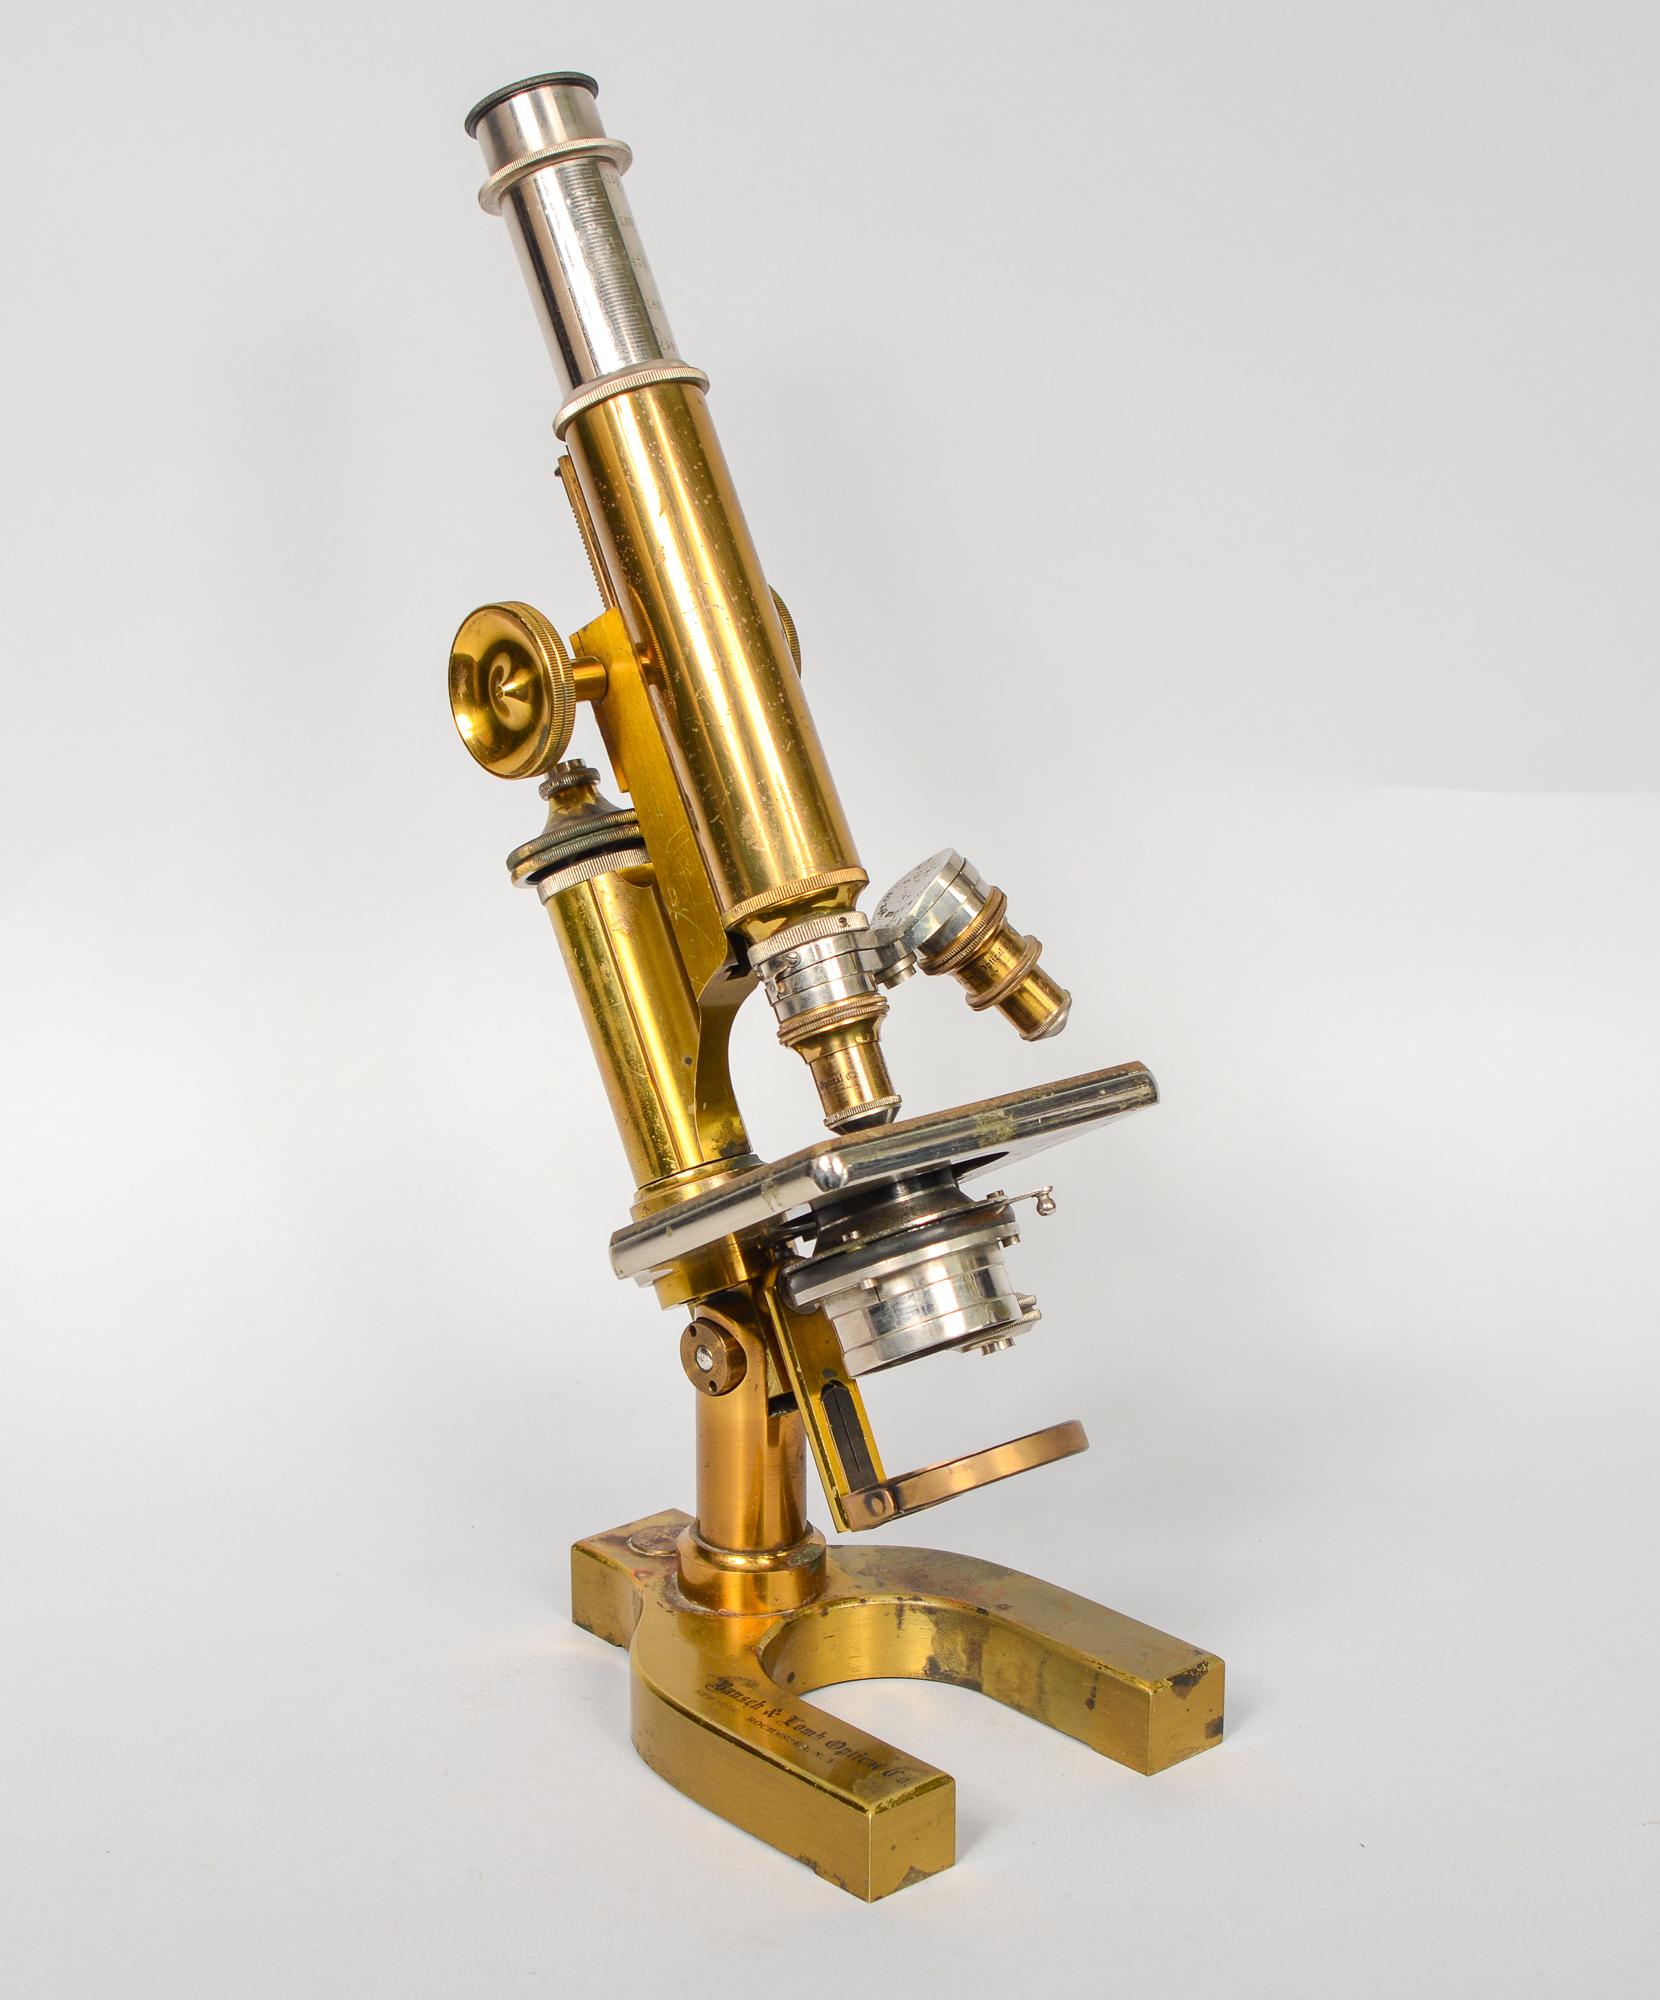 Brass Bausch and Lomb microscope. This has a patent date of February 16, 1897. This microscope has two objectives. The box this is in may not be the correct one. The dimensions listed are for the box. The microscope is 4.25 inches deep, 6 inches